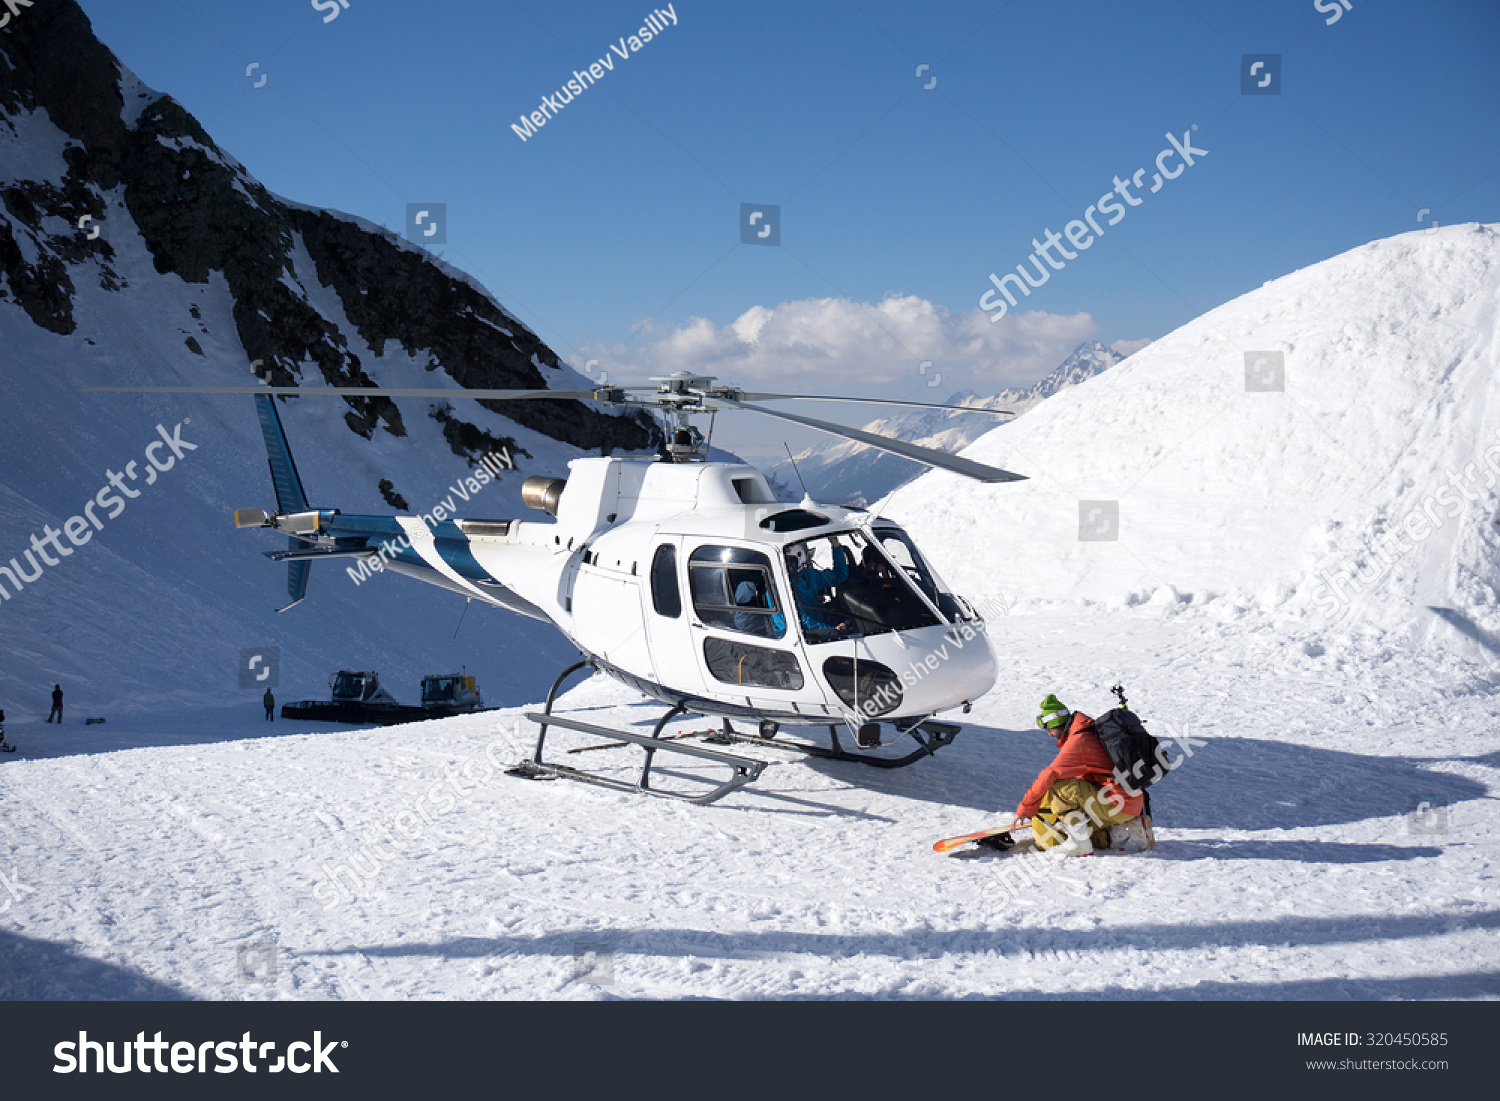 White rescue helicopter parked in the snowy mountains #320450585